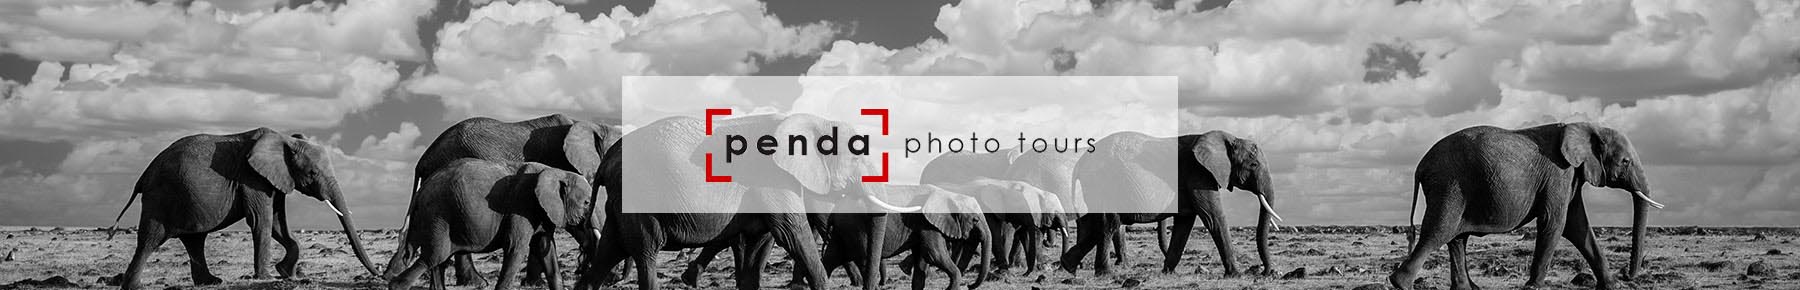 Find Out More about the Cameraland - Penda Partnership